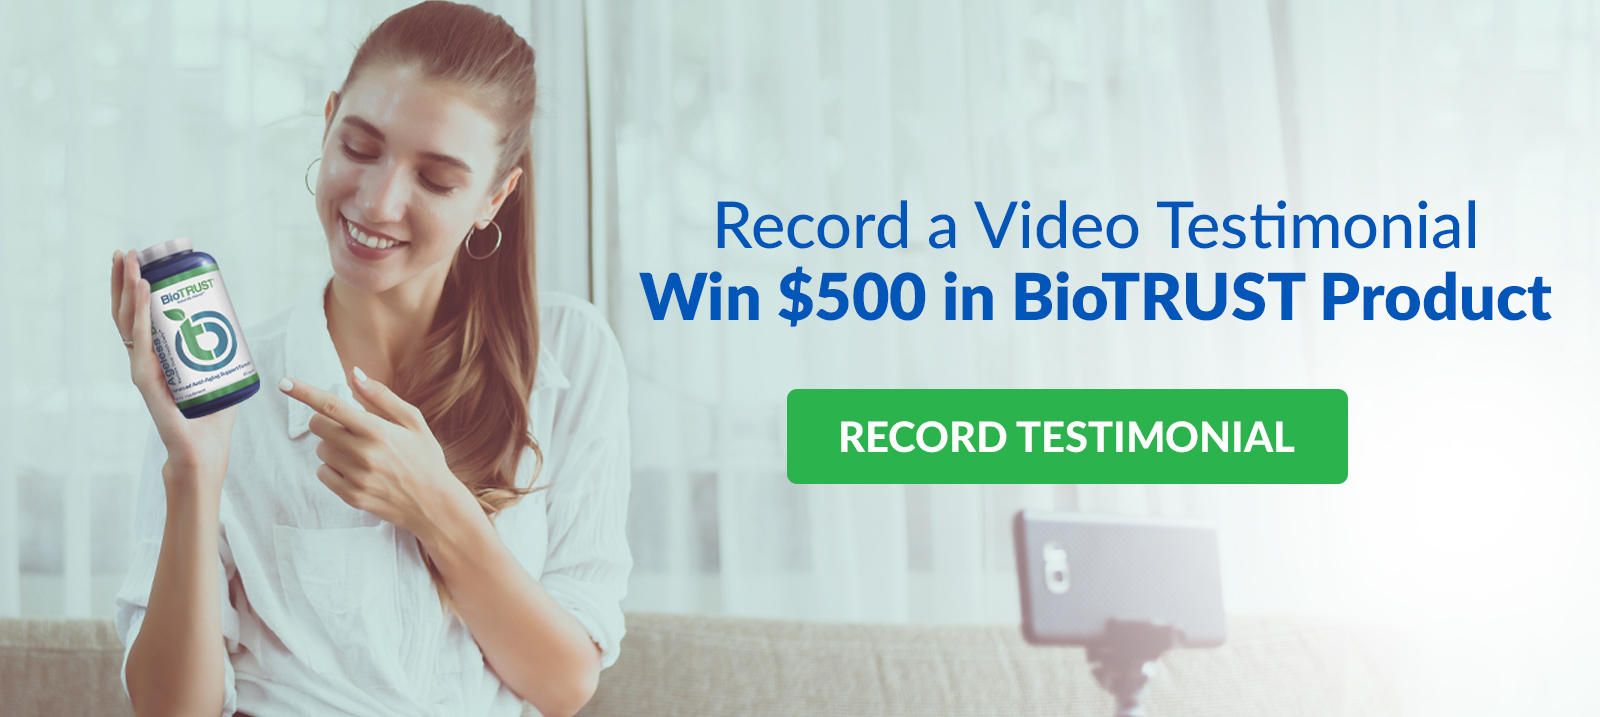  Record a Video Testimonial Win $500 in BioTRUST Product RECORD TESTIMONIAL aey FEE A % 